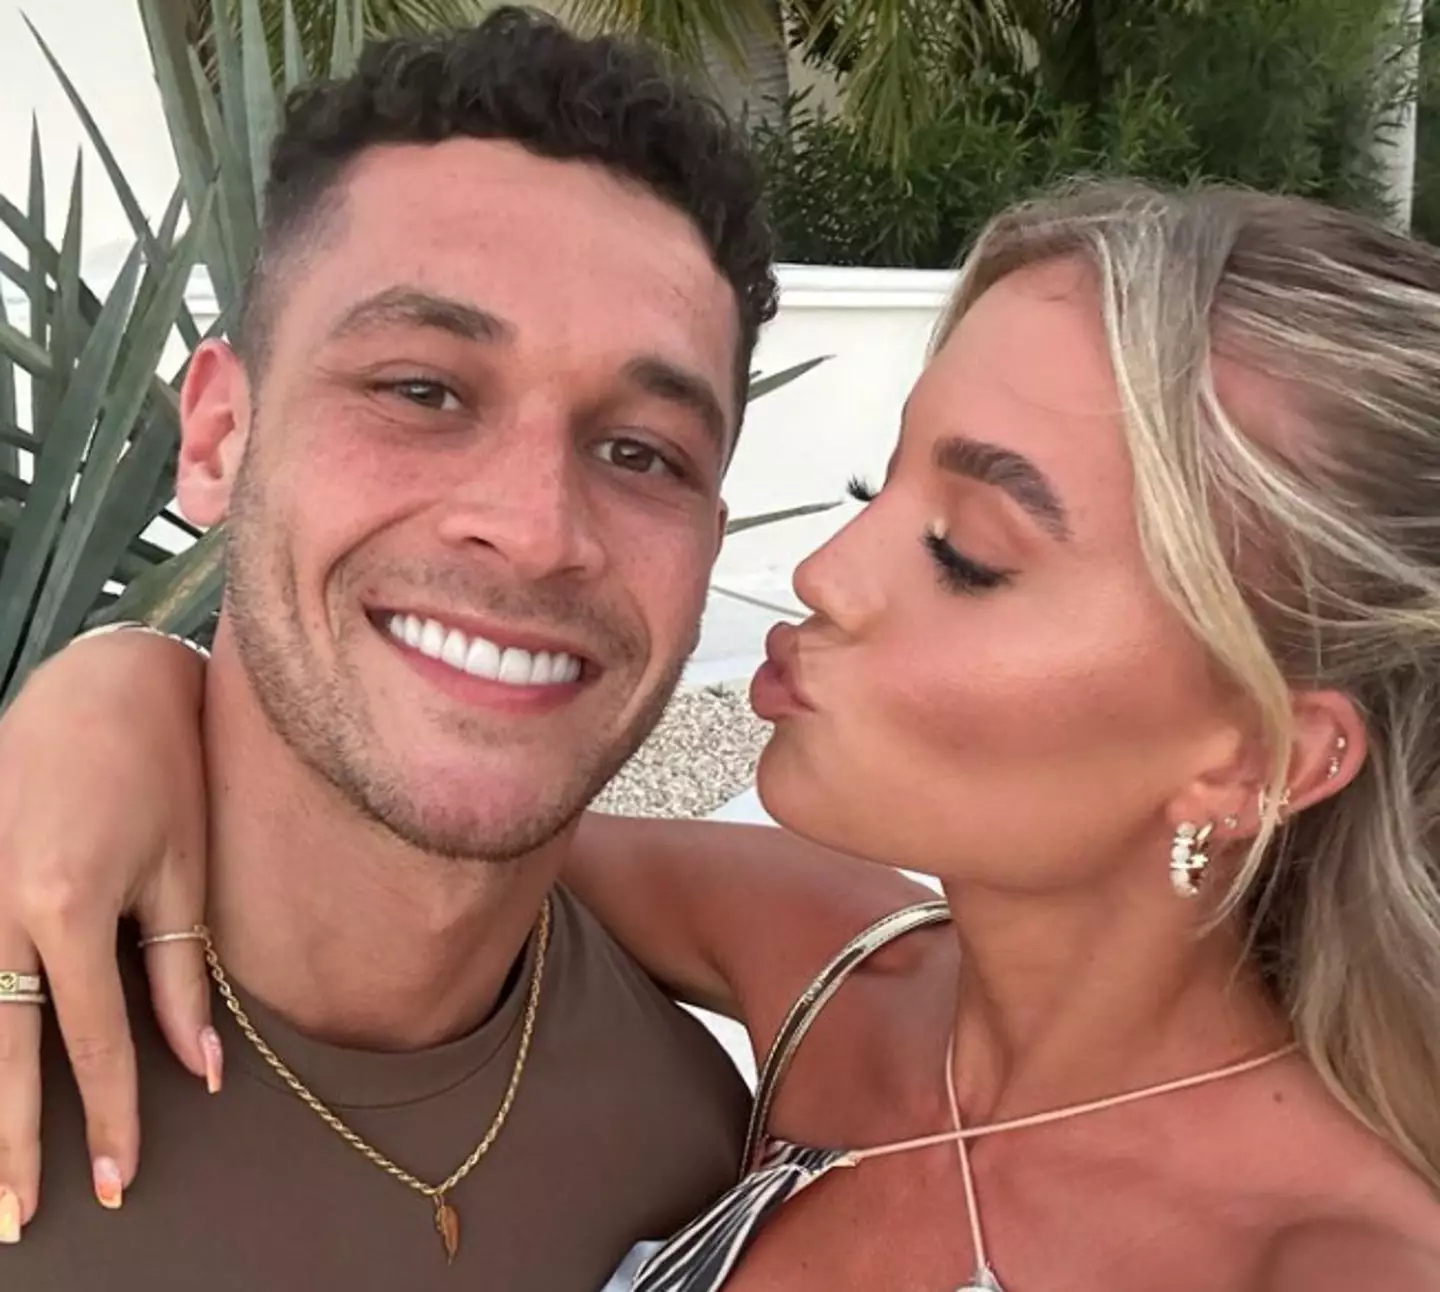 Callum Jones and Molly Smith first met on Love Island four years ago.